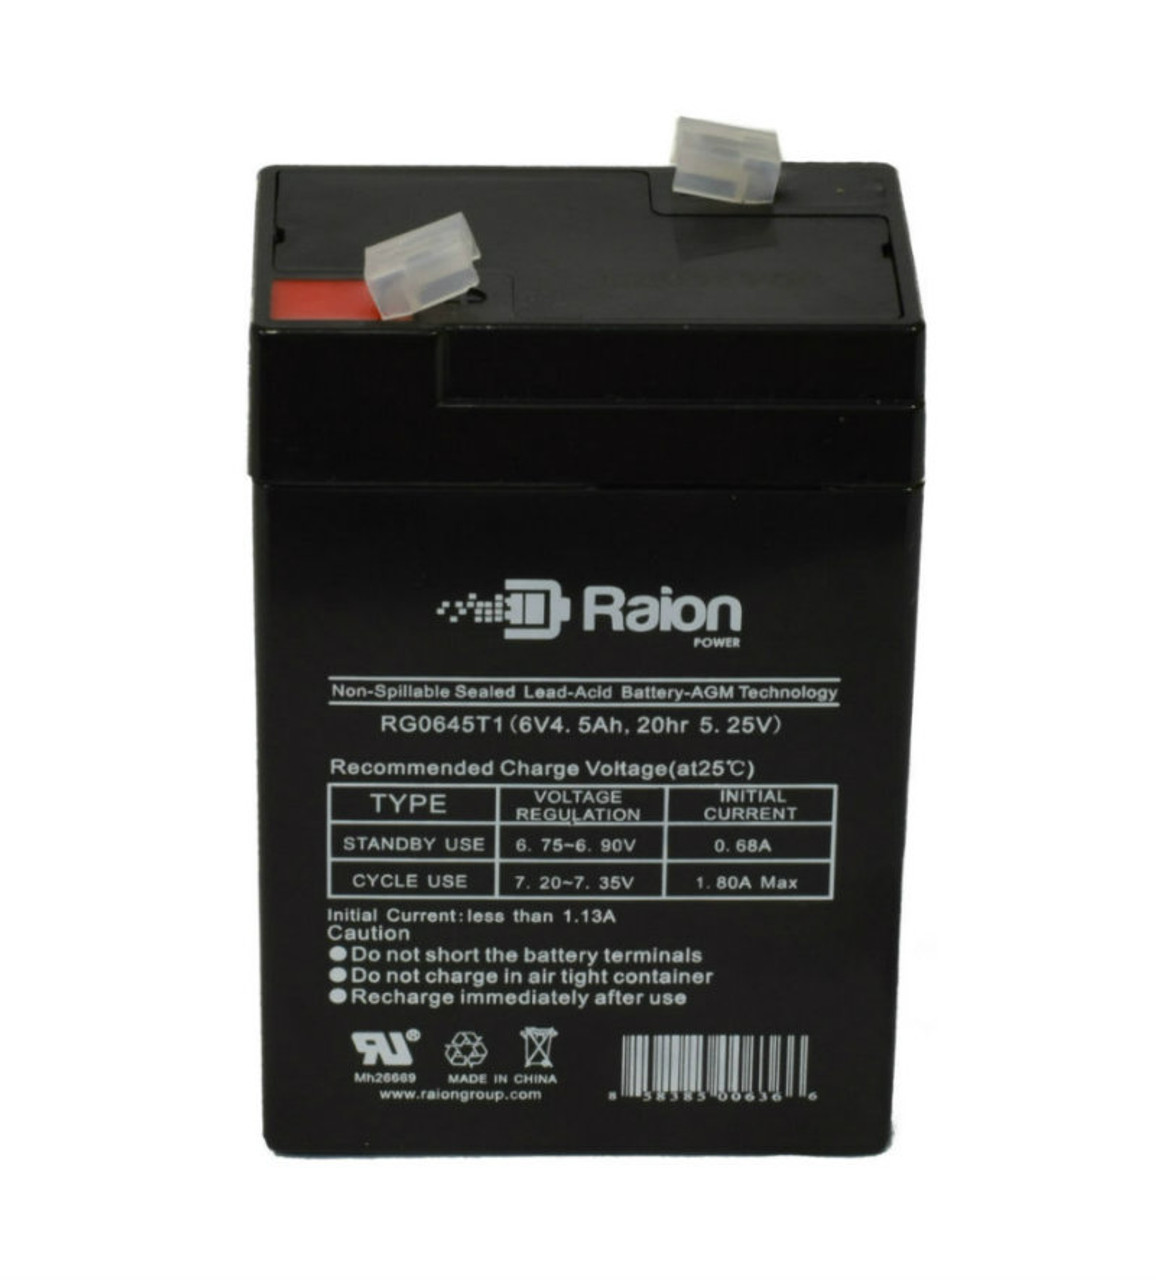 Raion Power RG0645T1 Replacement Battery Cartridge for ExpertPower EXP645